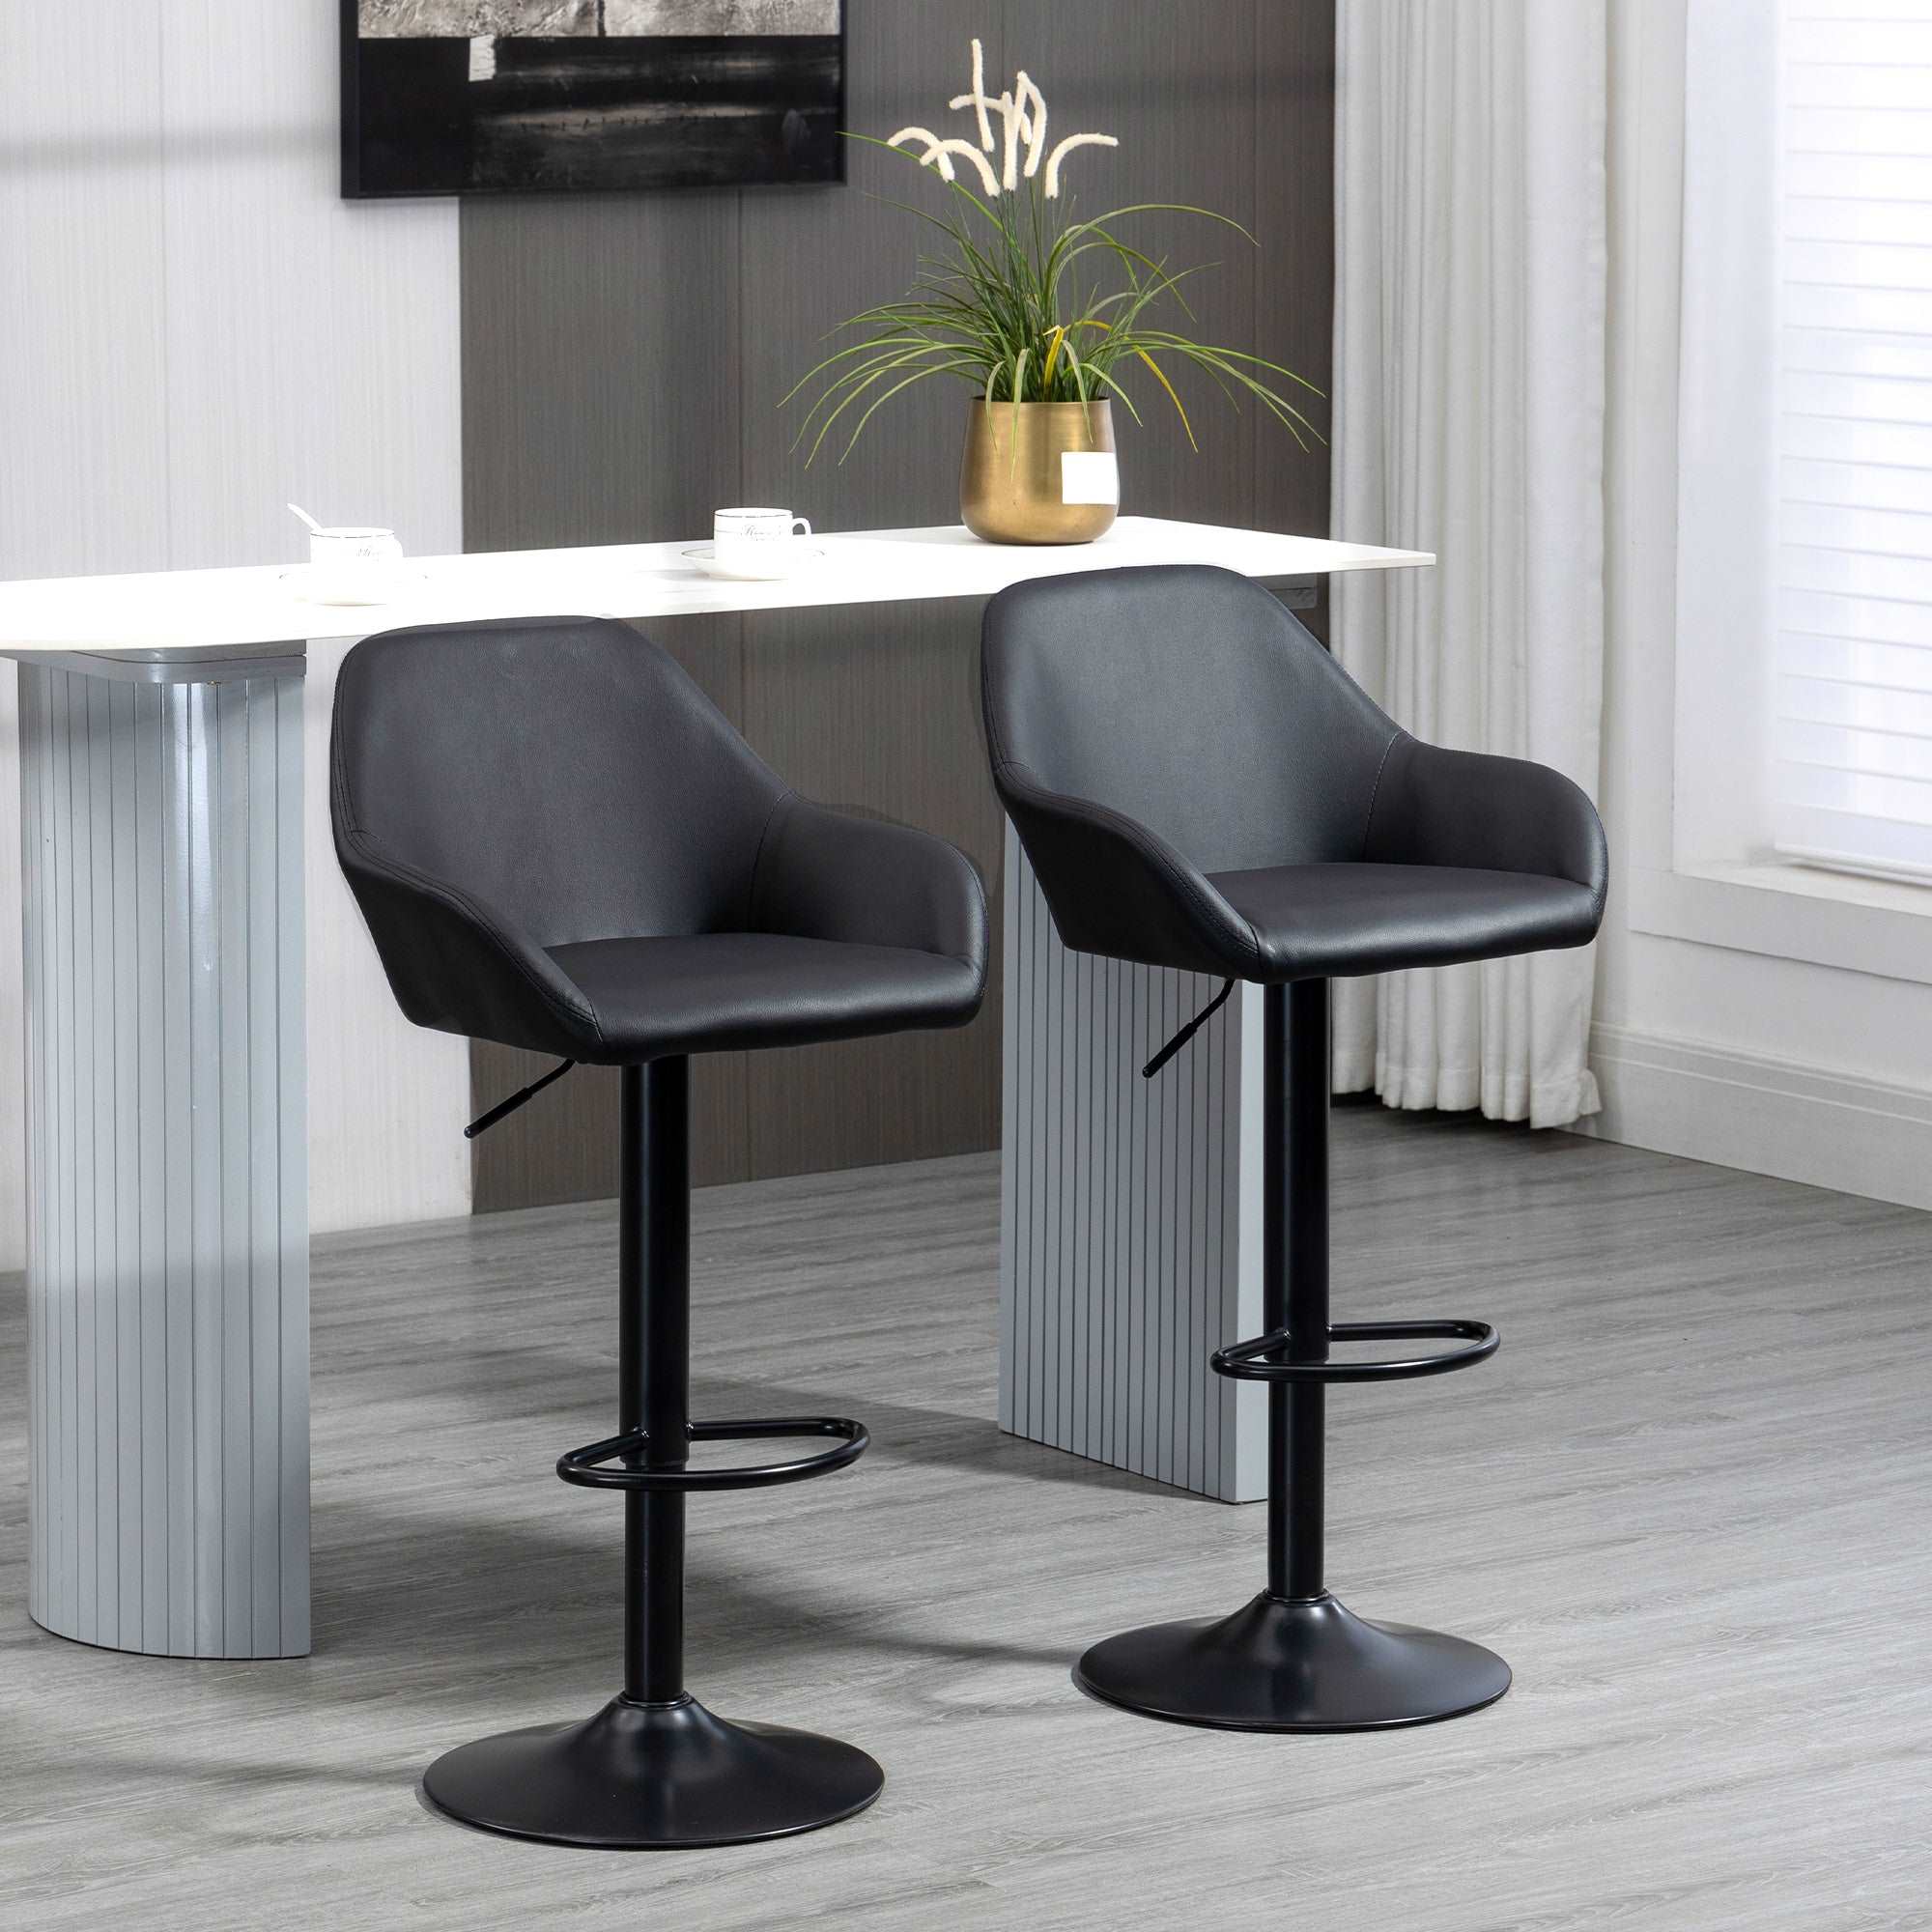 Adjustable Bar Stools Set of 2, Swivel Barstools with Footrest and Backrest, PU Leather and Steel Base, for Kitchen Counter Dining Room, Black  AOSOM   